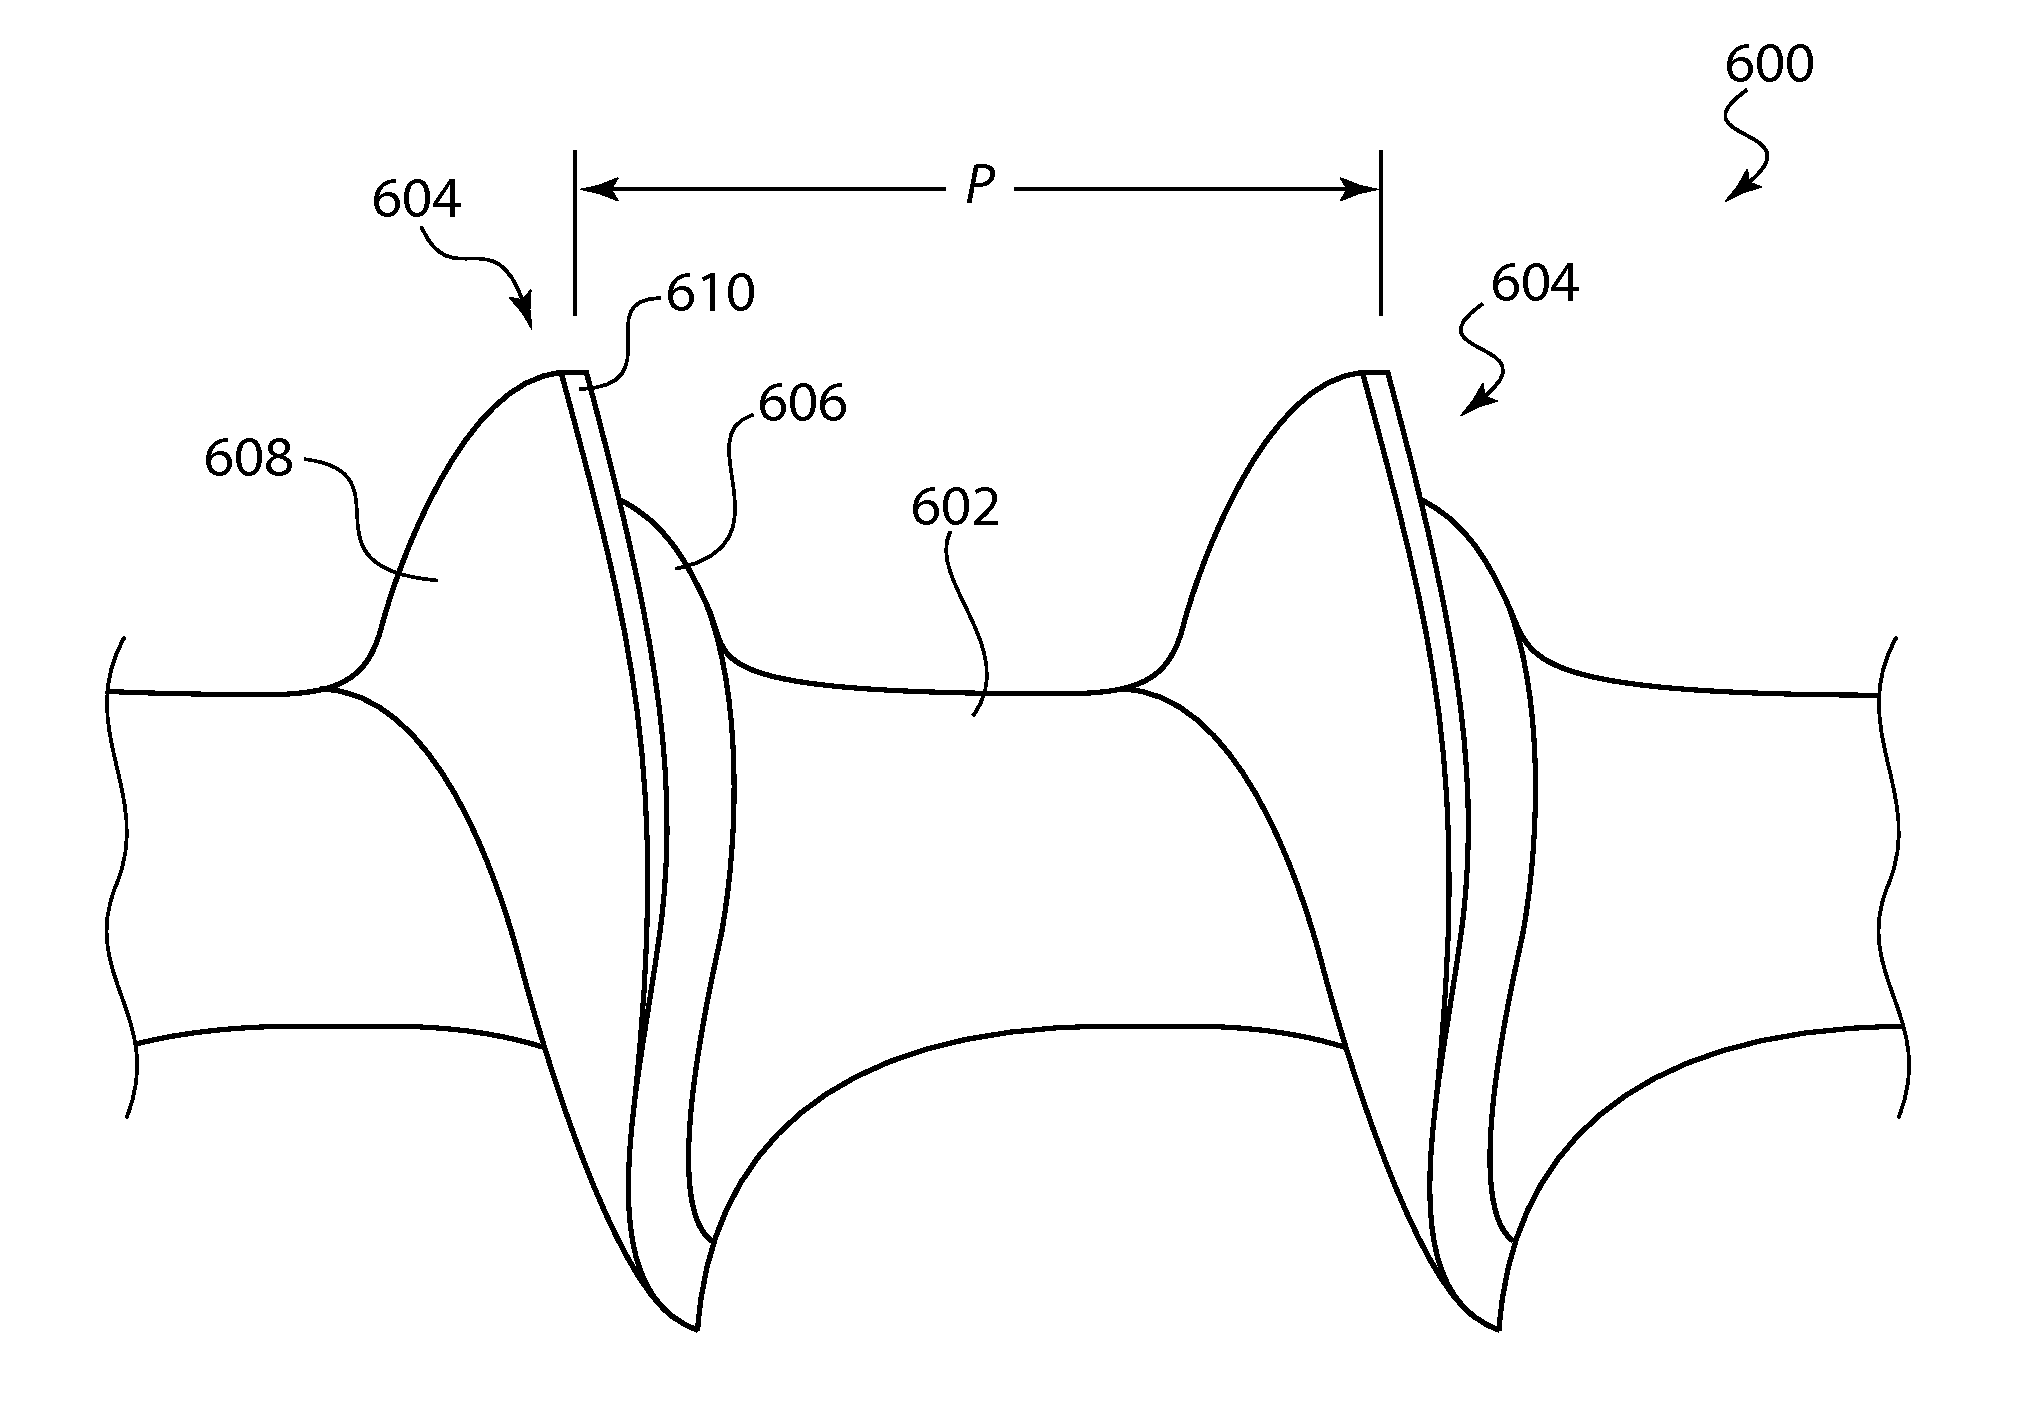 Bone screw and method for manufacturing the same